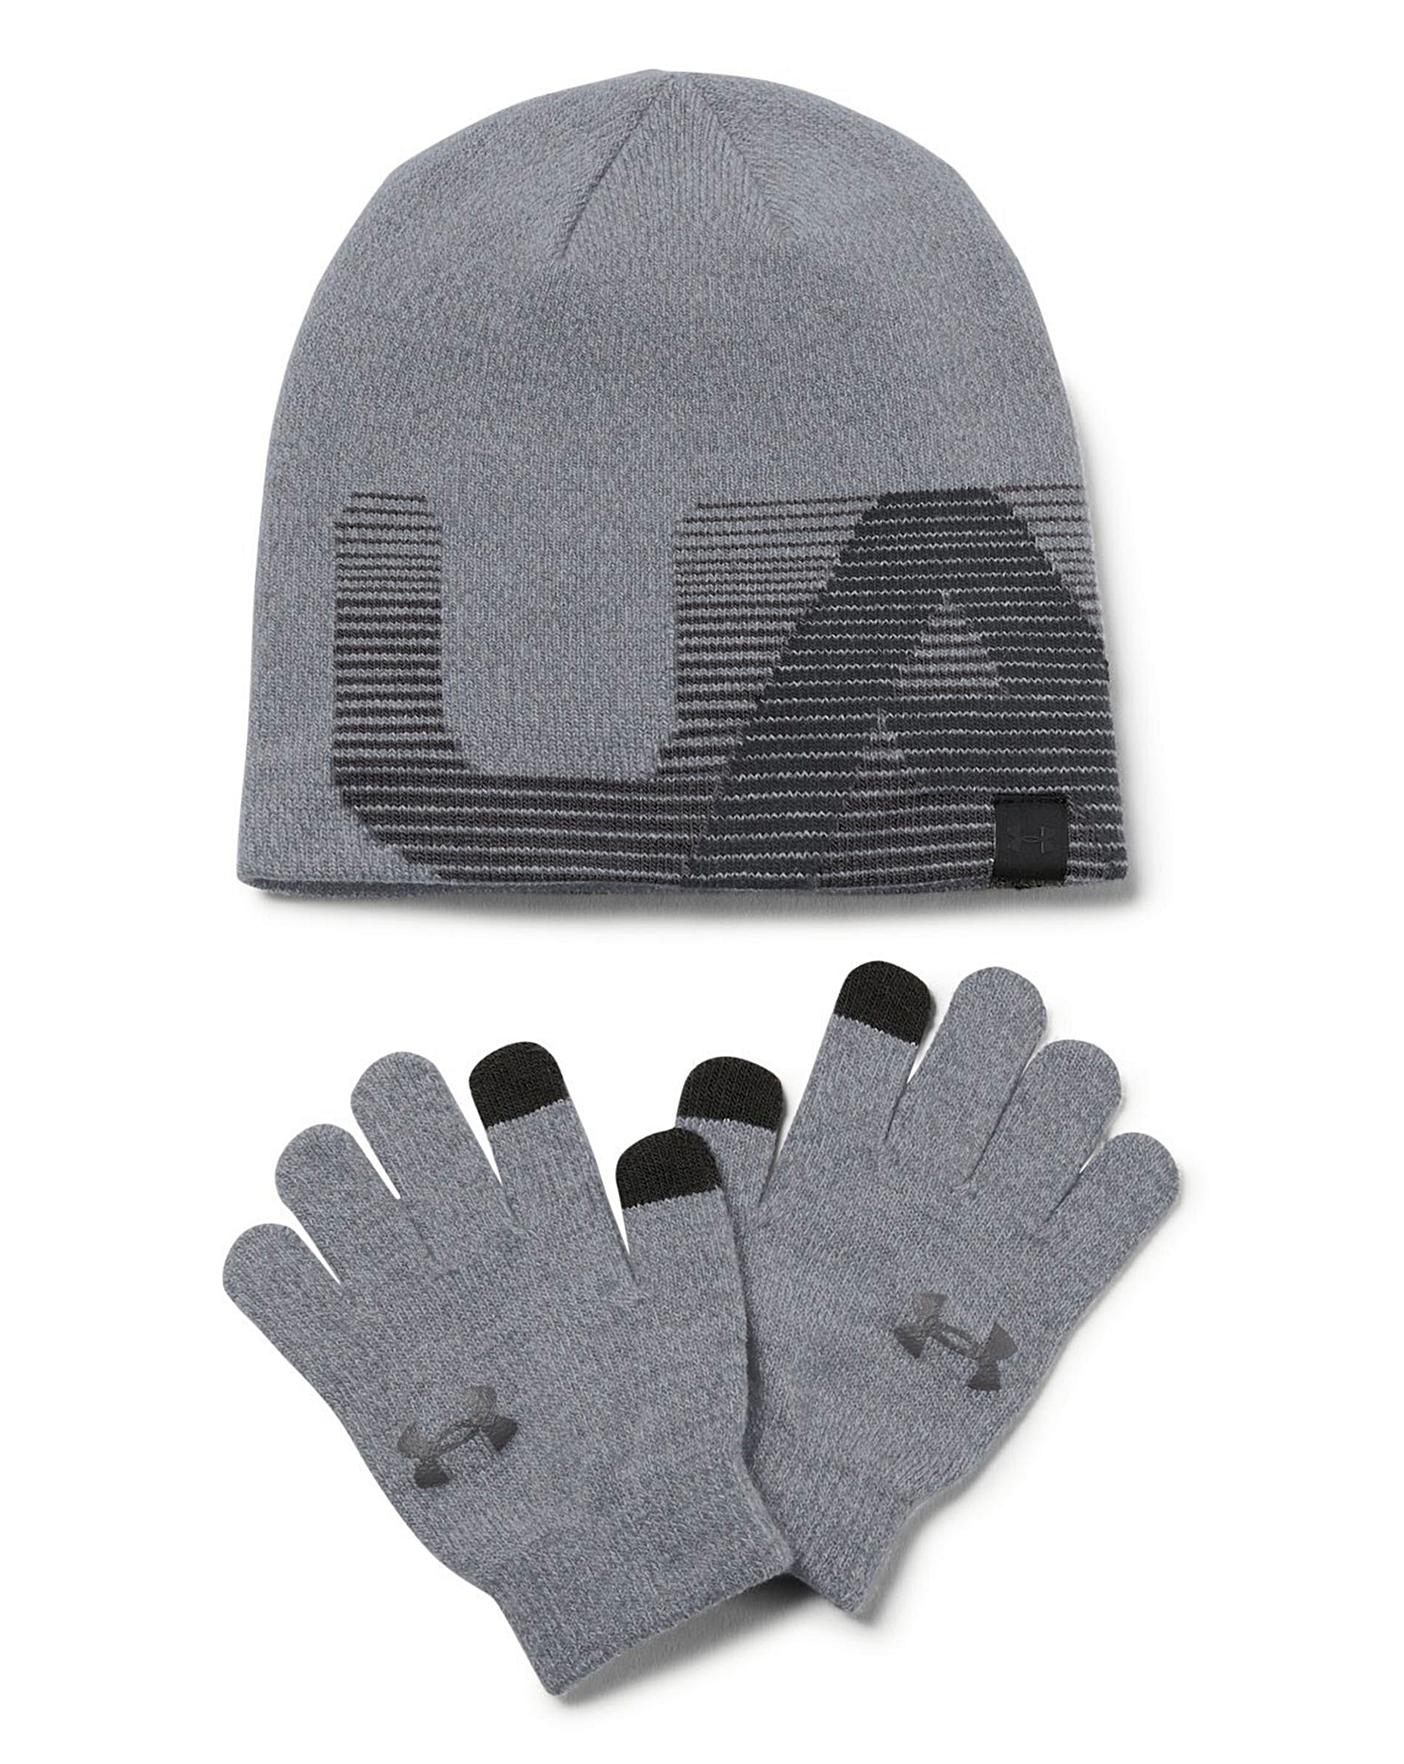 under armour hat and glove set